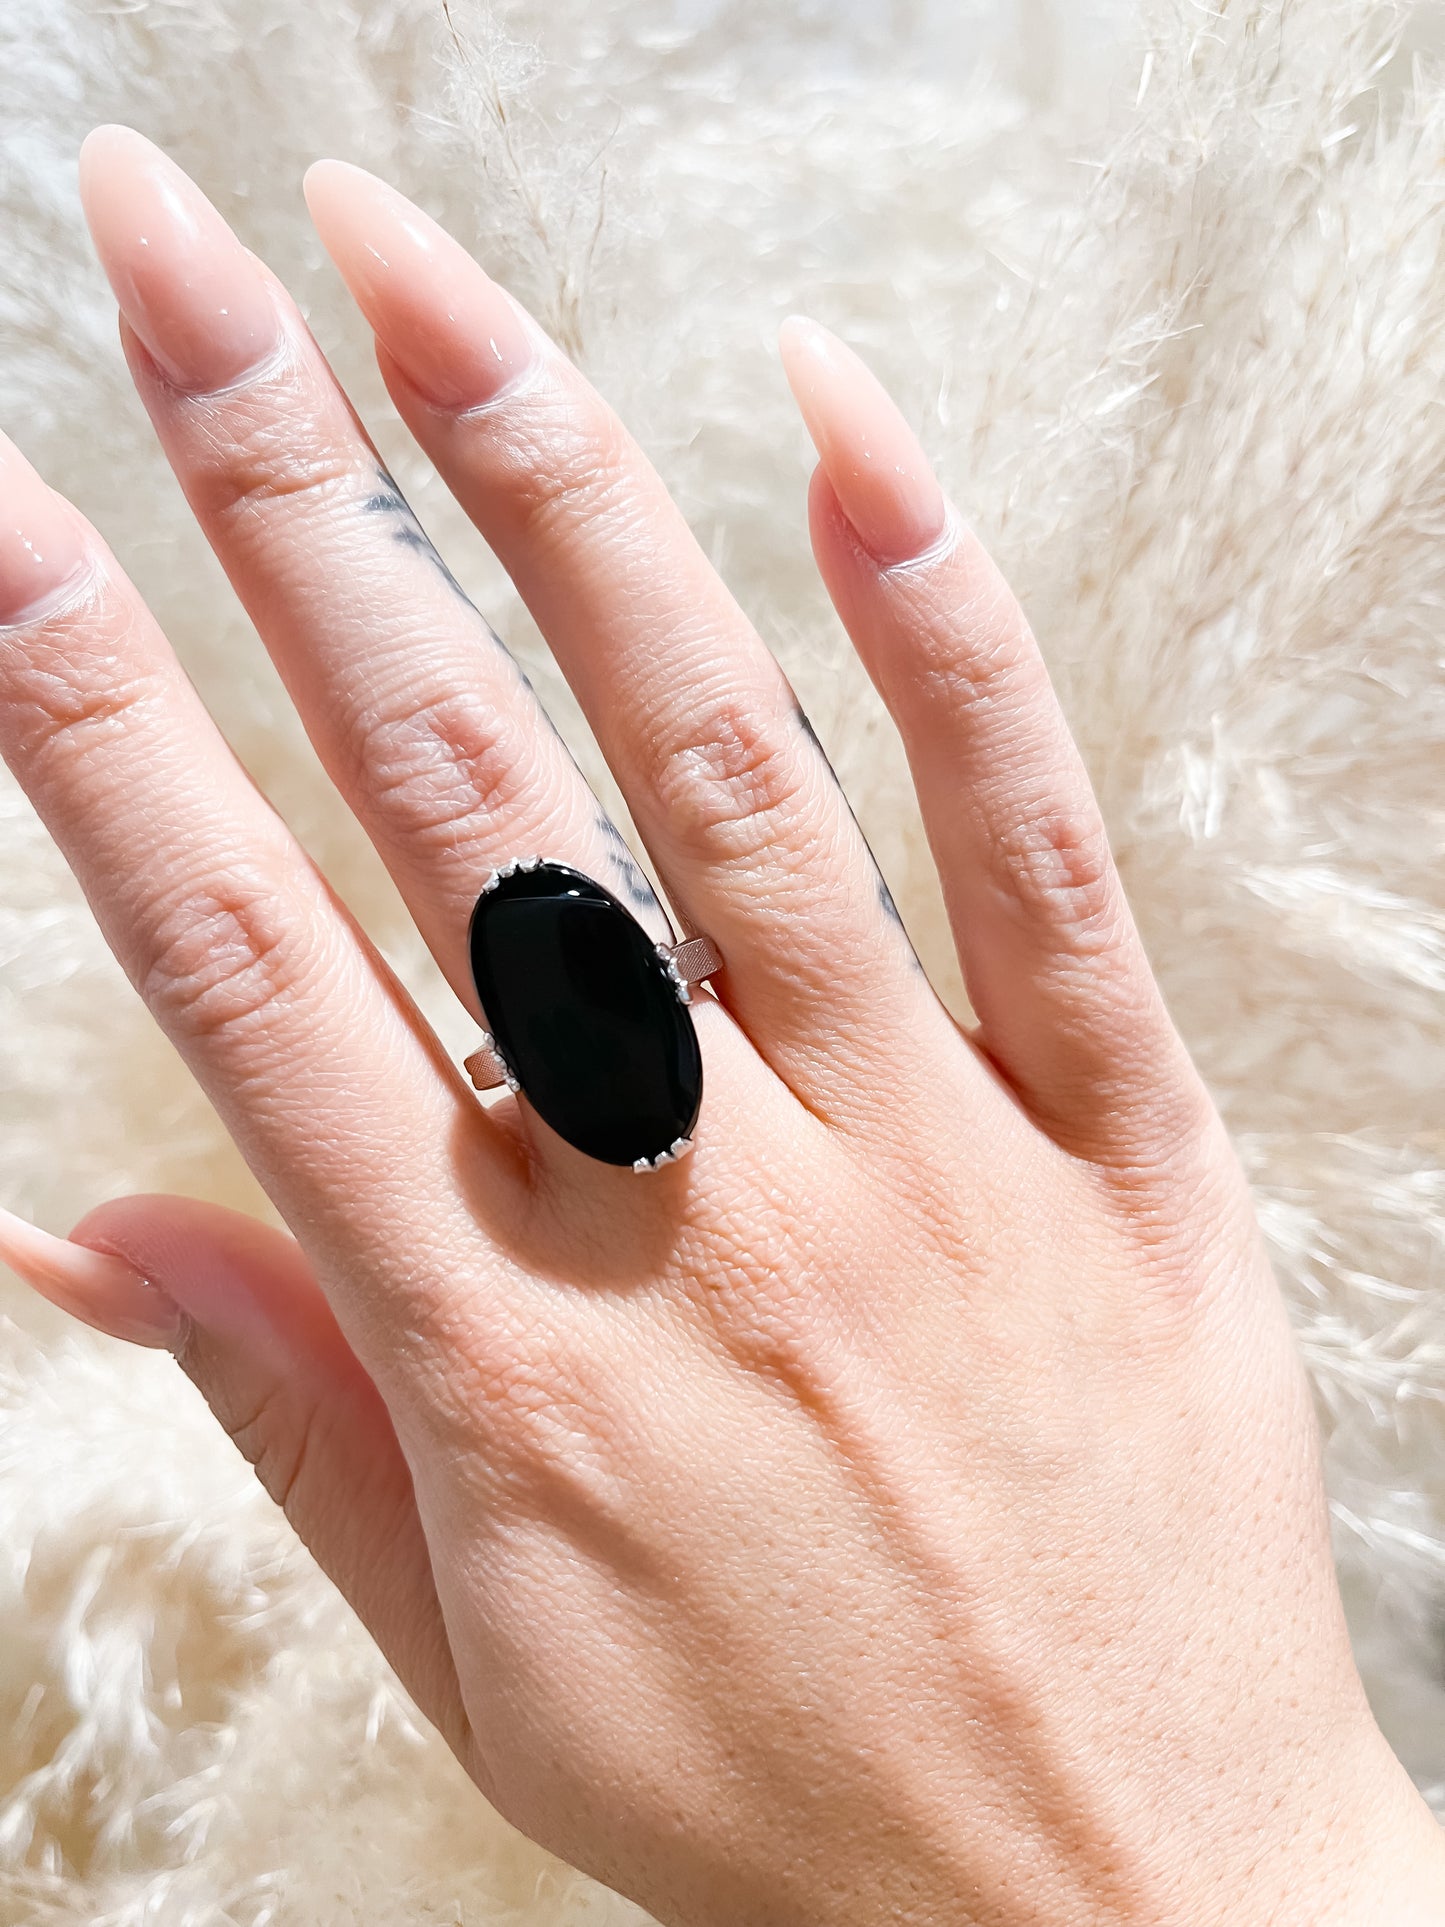 Load image into Gallery viewer, Vintage Onyx Ring
